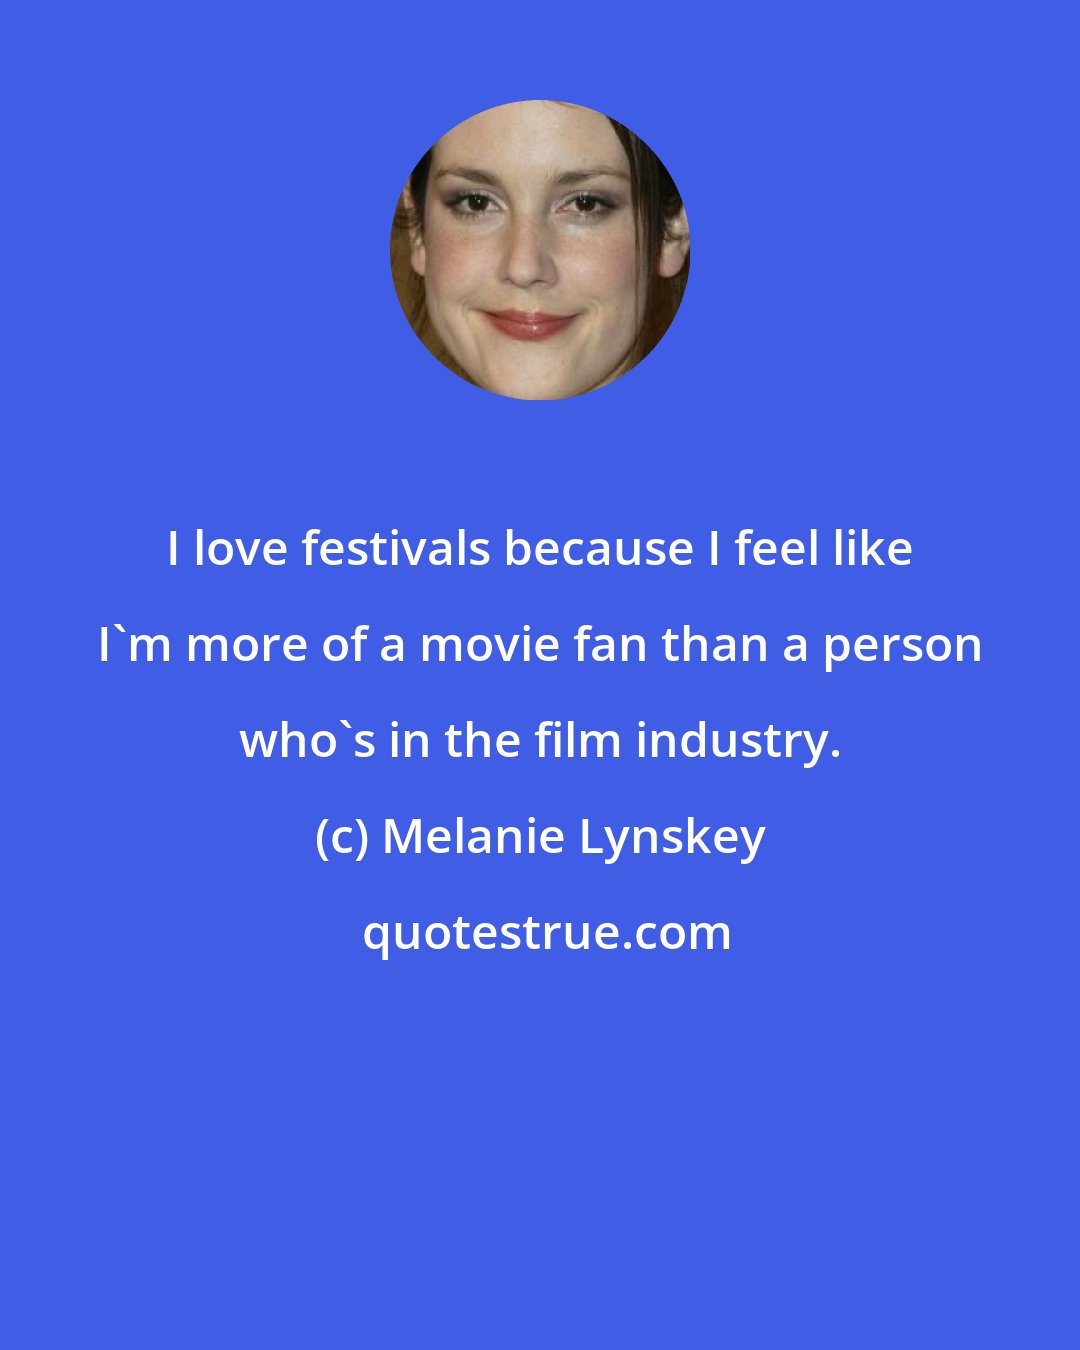 Melanie Lynskey: I love festivals because I feel like I'm more of a movie fan than a person who's in the film industry.